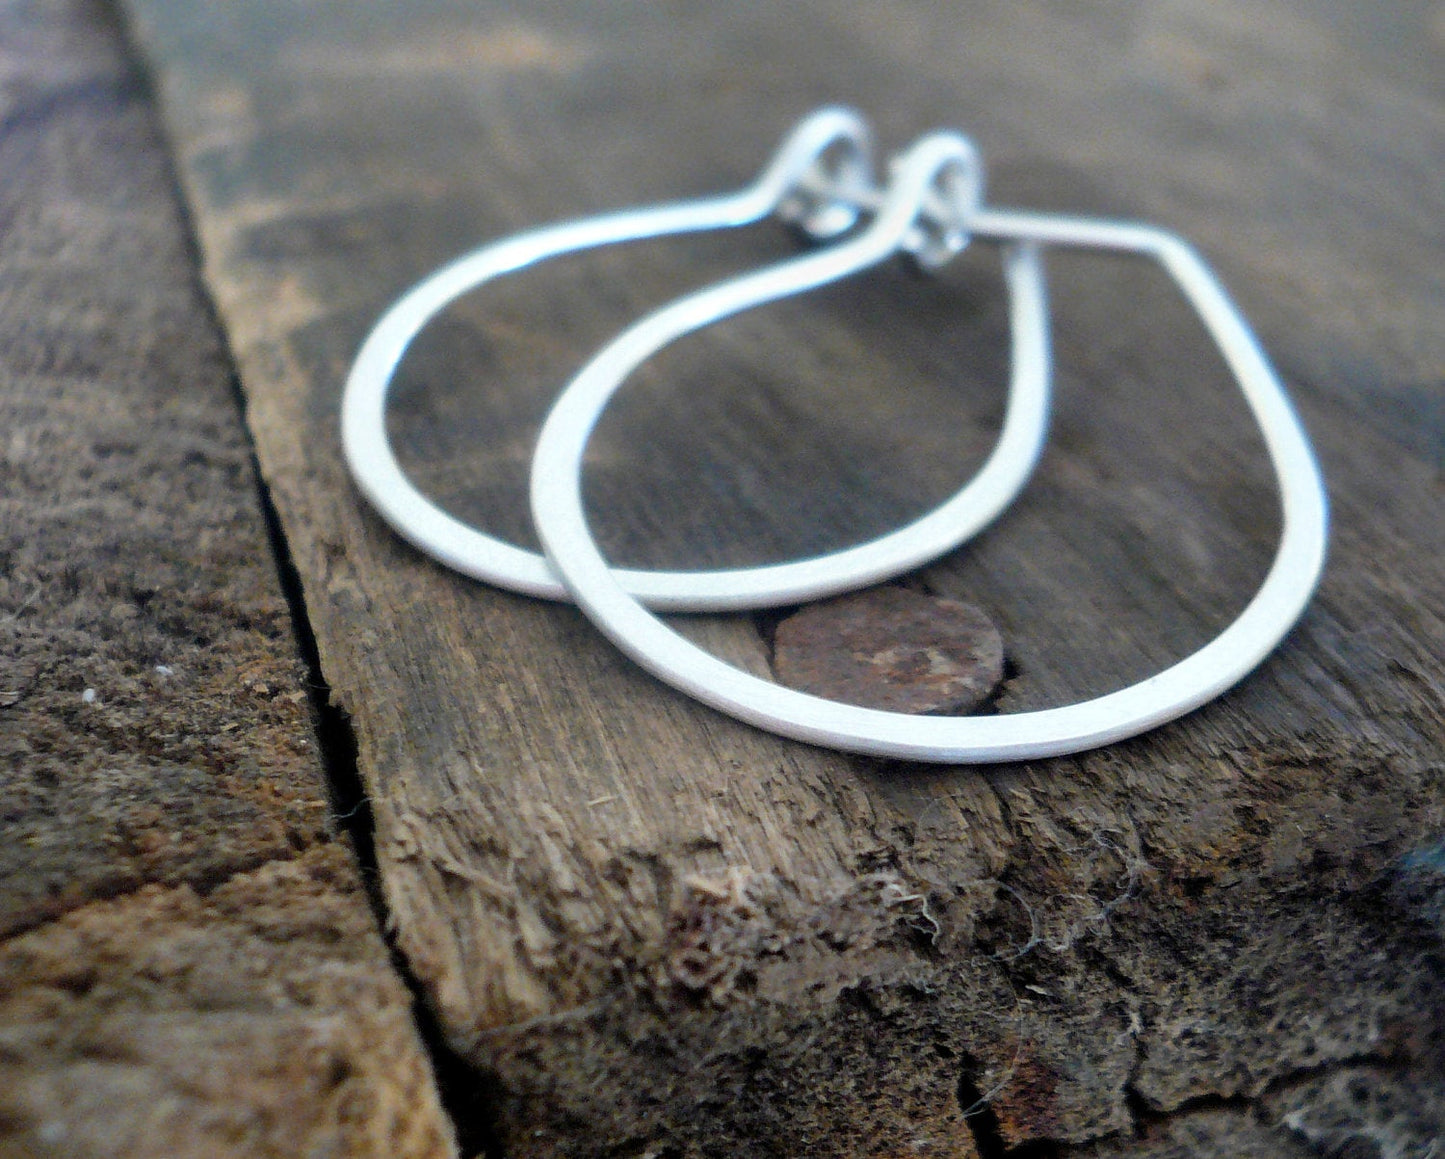 Horseshoe Hoops - Handmade. hand forged. Sterling Silver or 14kt goldfill Earrings